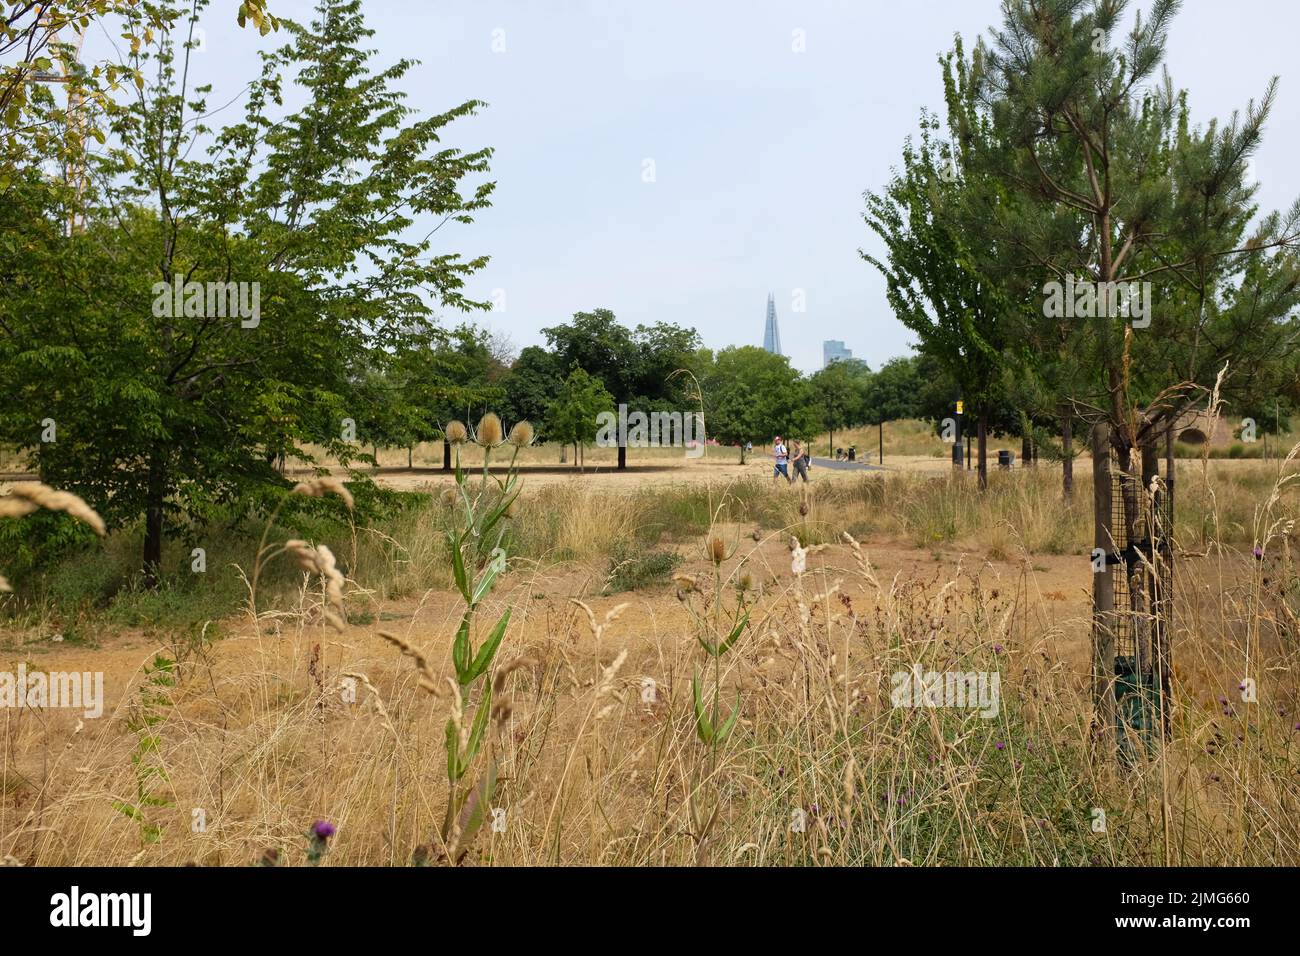 Burgess Park, at 56 hectares the largest park in the London borough of Southwark, London, England. Stock Photo